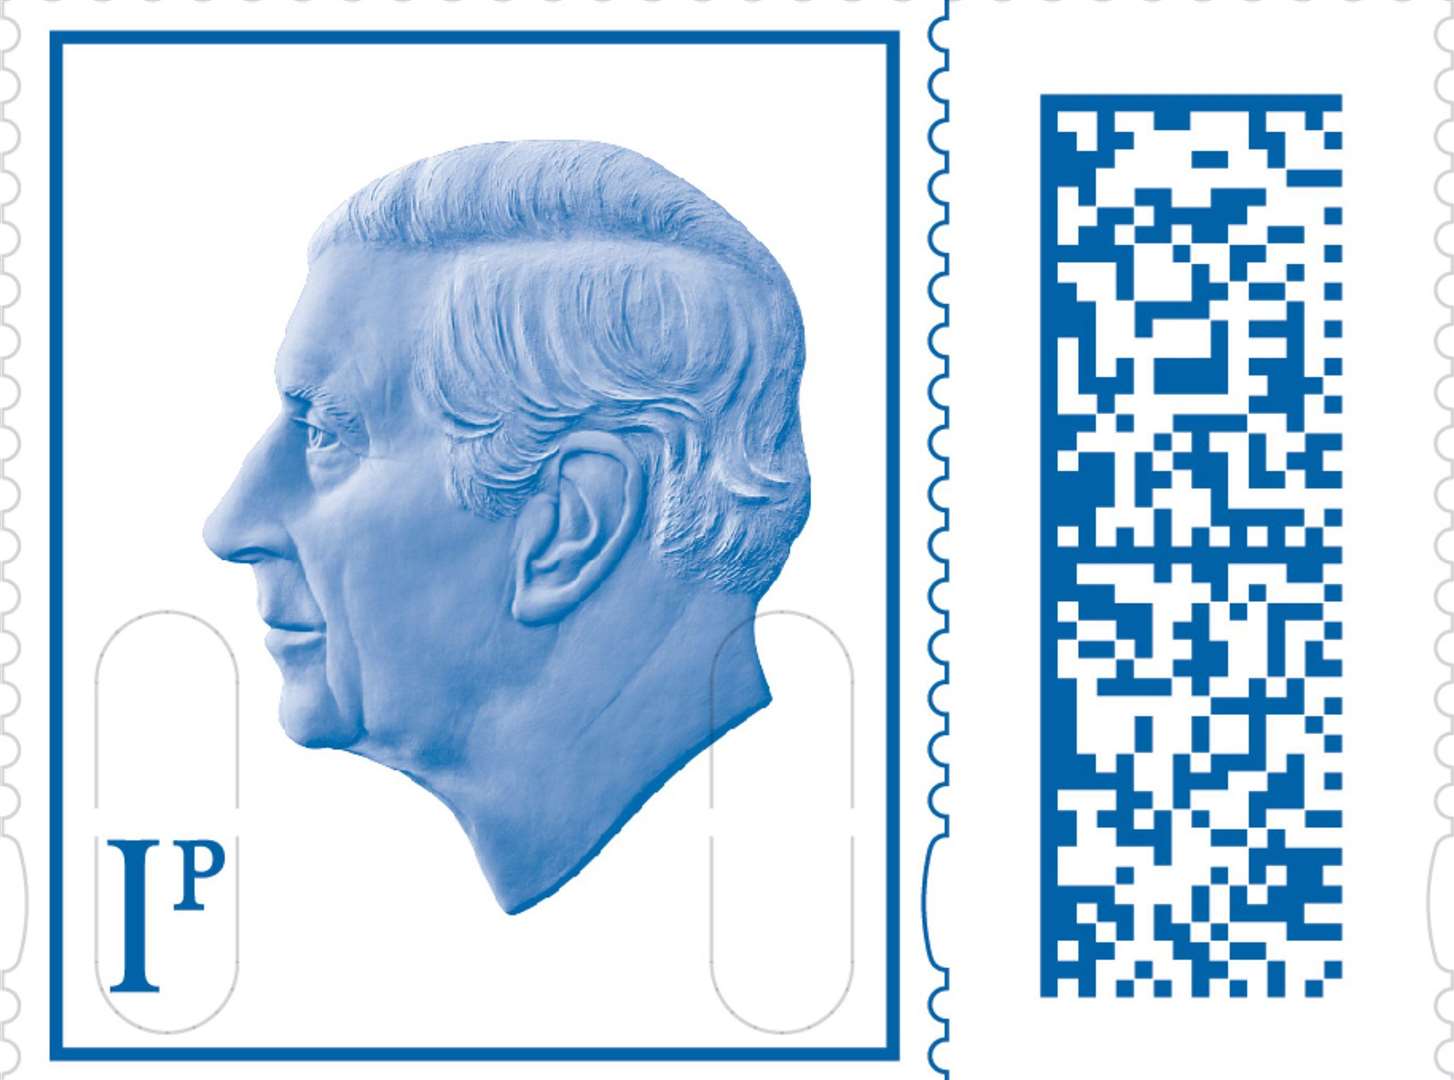 Each new stamp featuring King Charles is proving popular with collectors